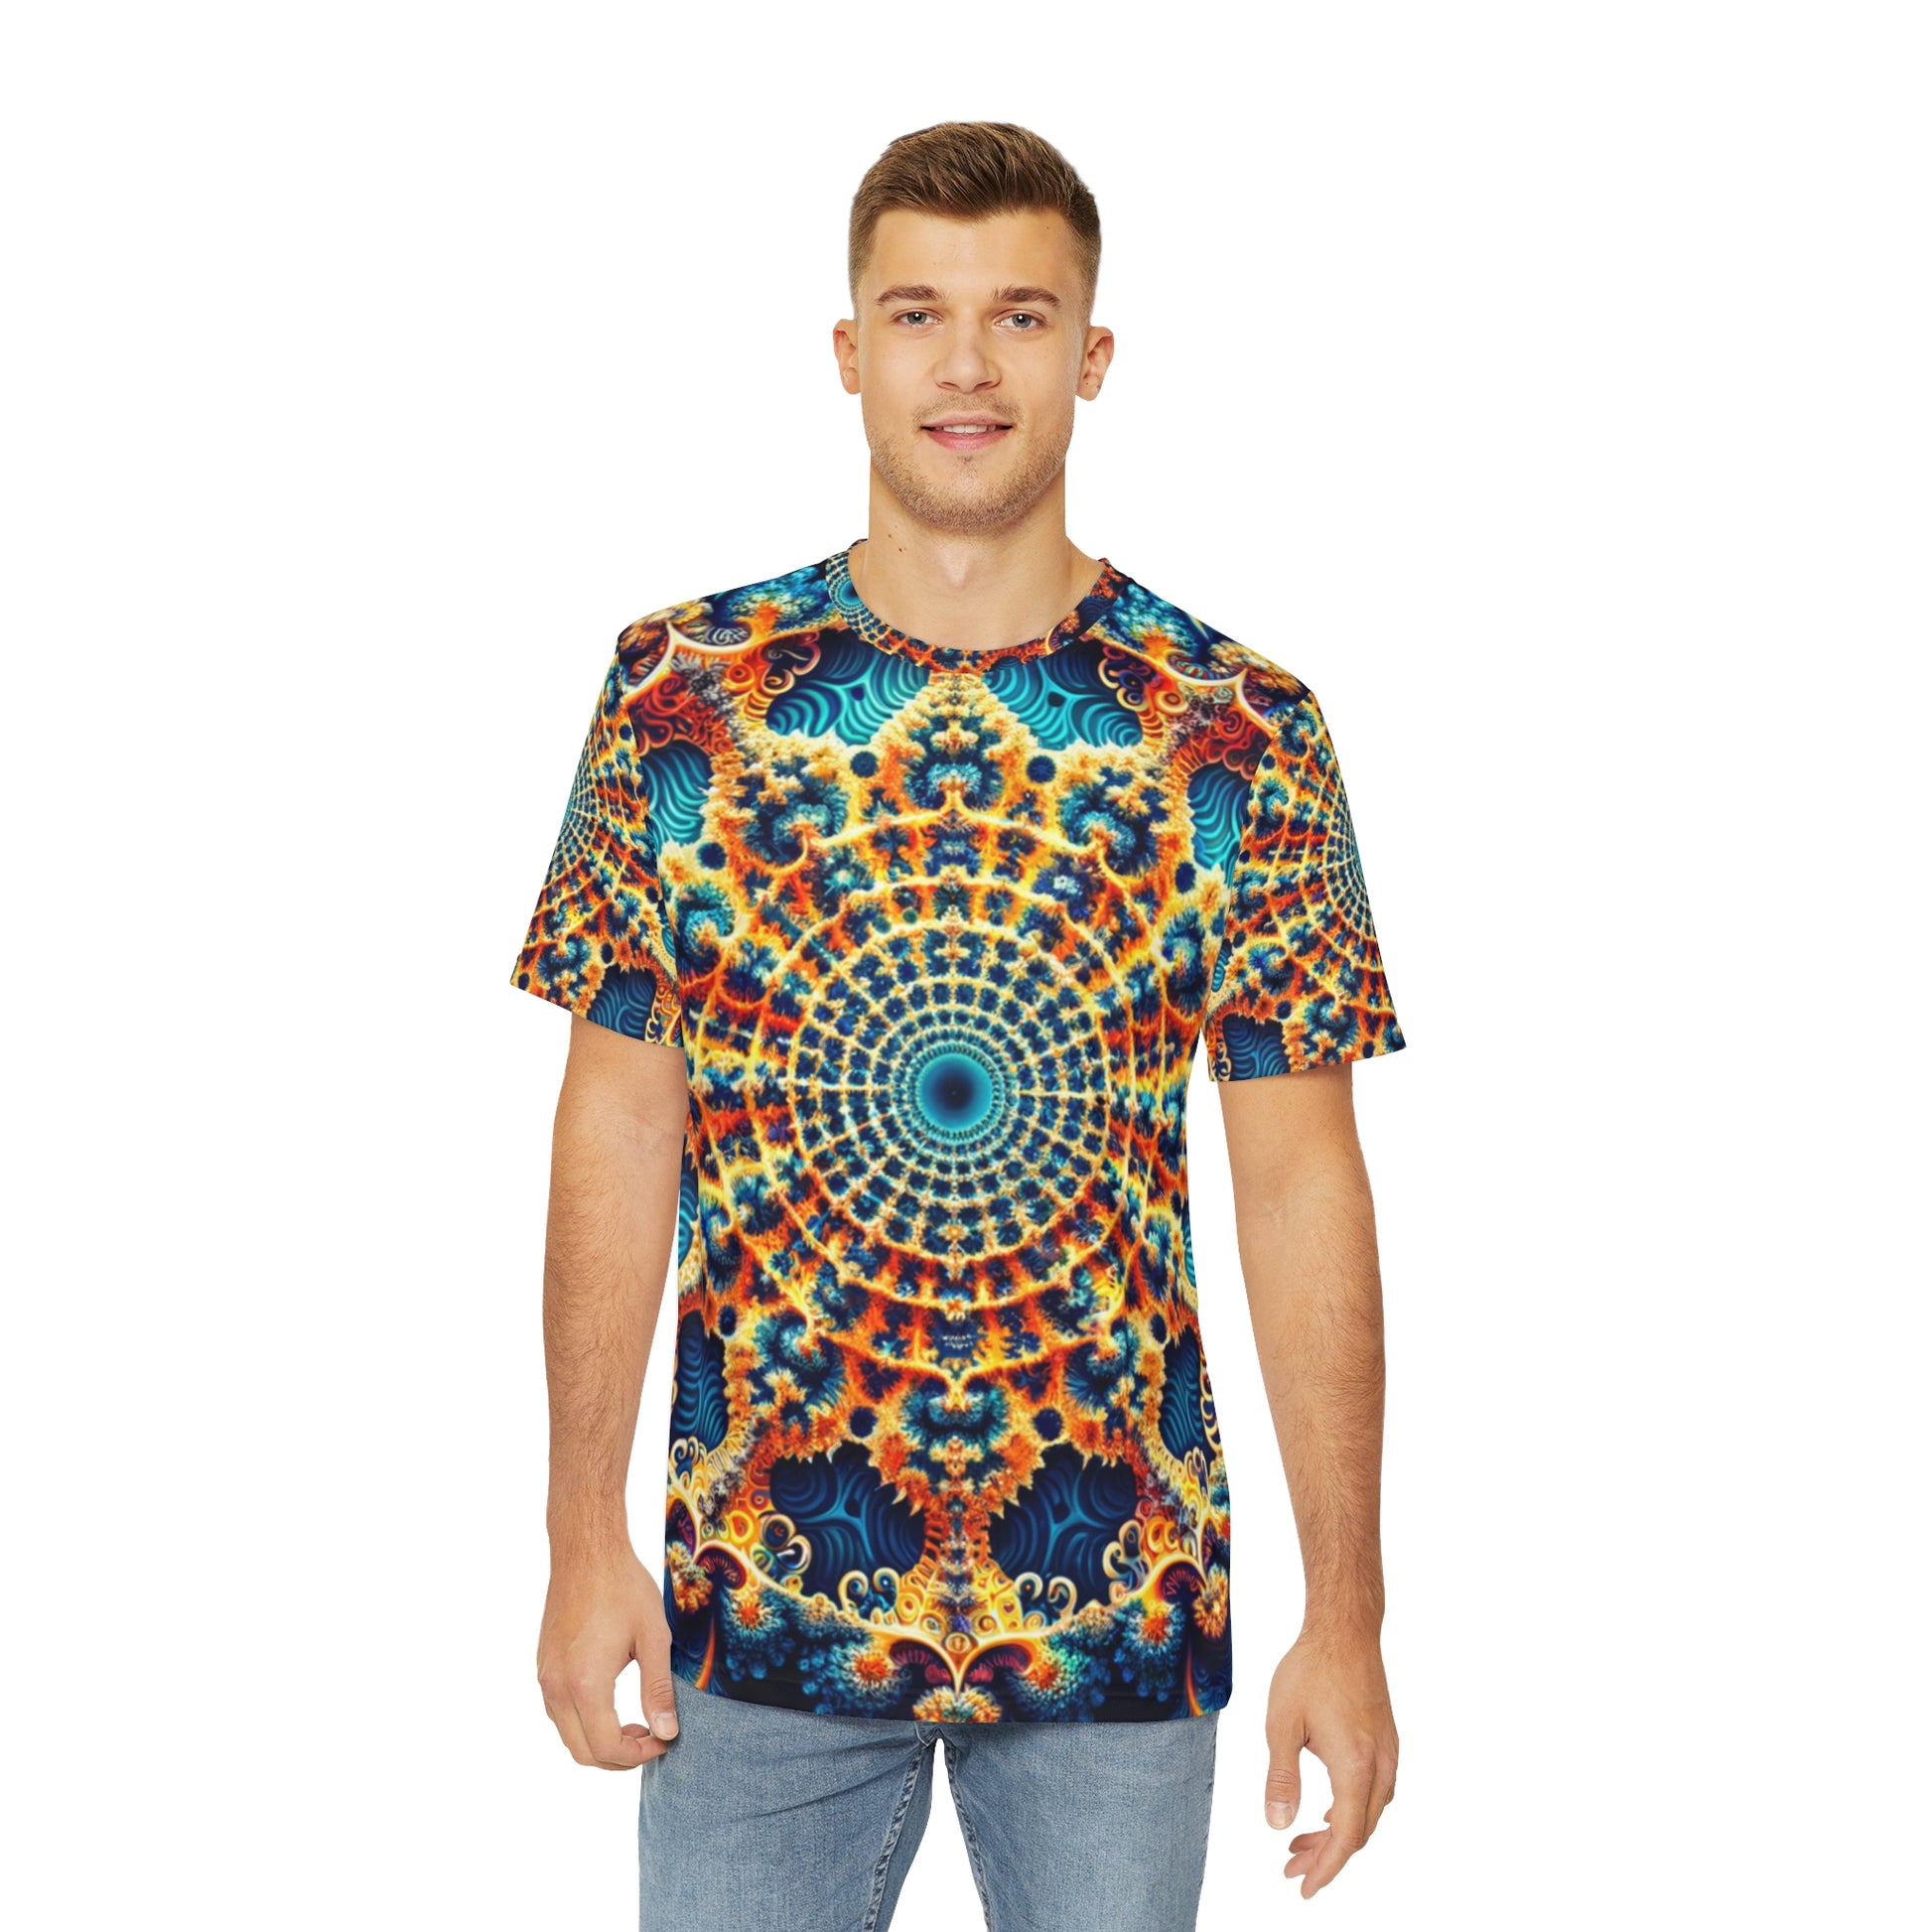 Front view of the Azurite Mandala Bloom Crewneck Pullover All-Over Print Short-Sleeved Shirt blue yellow red white mandala pattern paired with casual denim pants worn by a white man